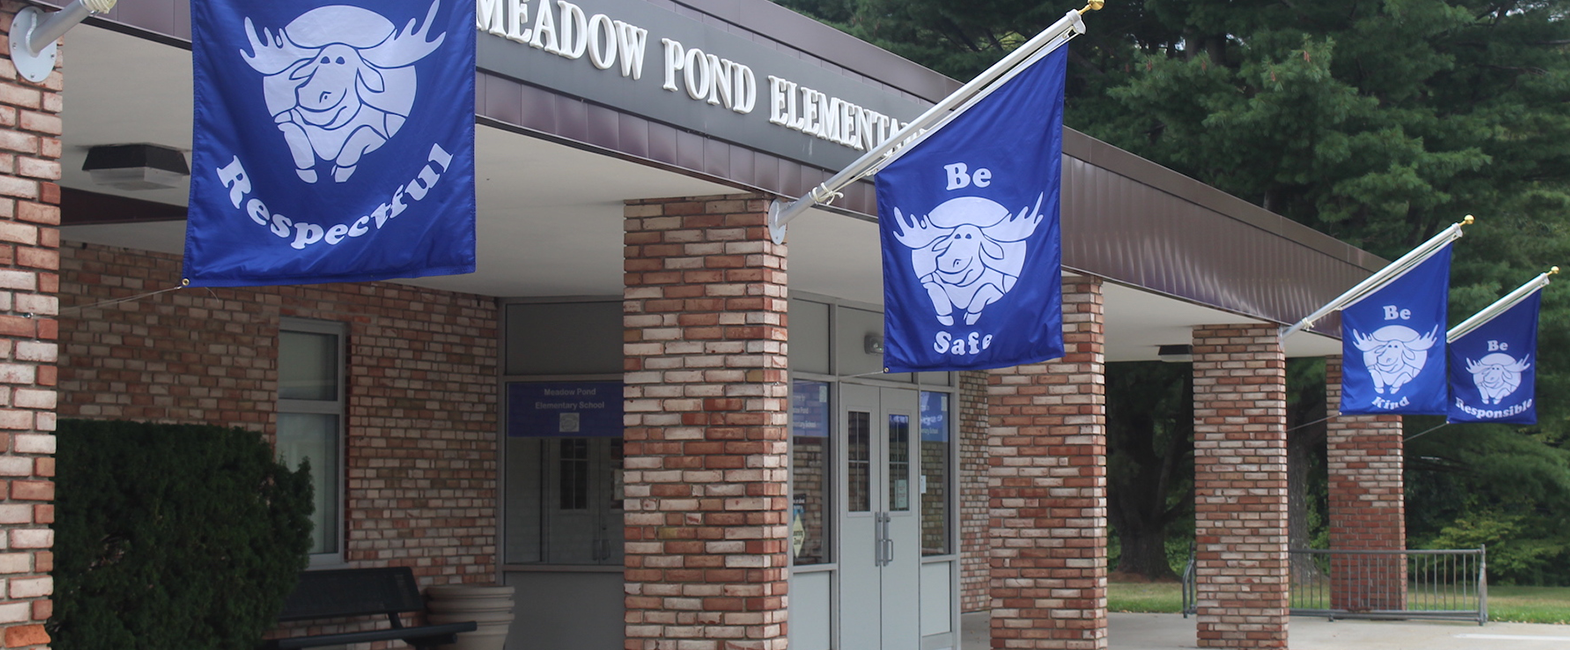 Search Real Estate Listings with Meadow Pond Elementary School District, part of the Katonah-Lewisboro School District